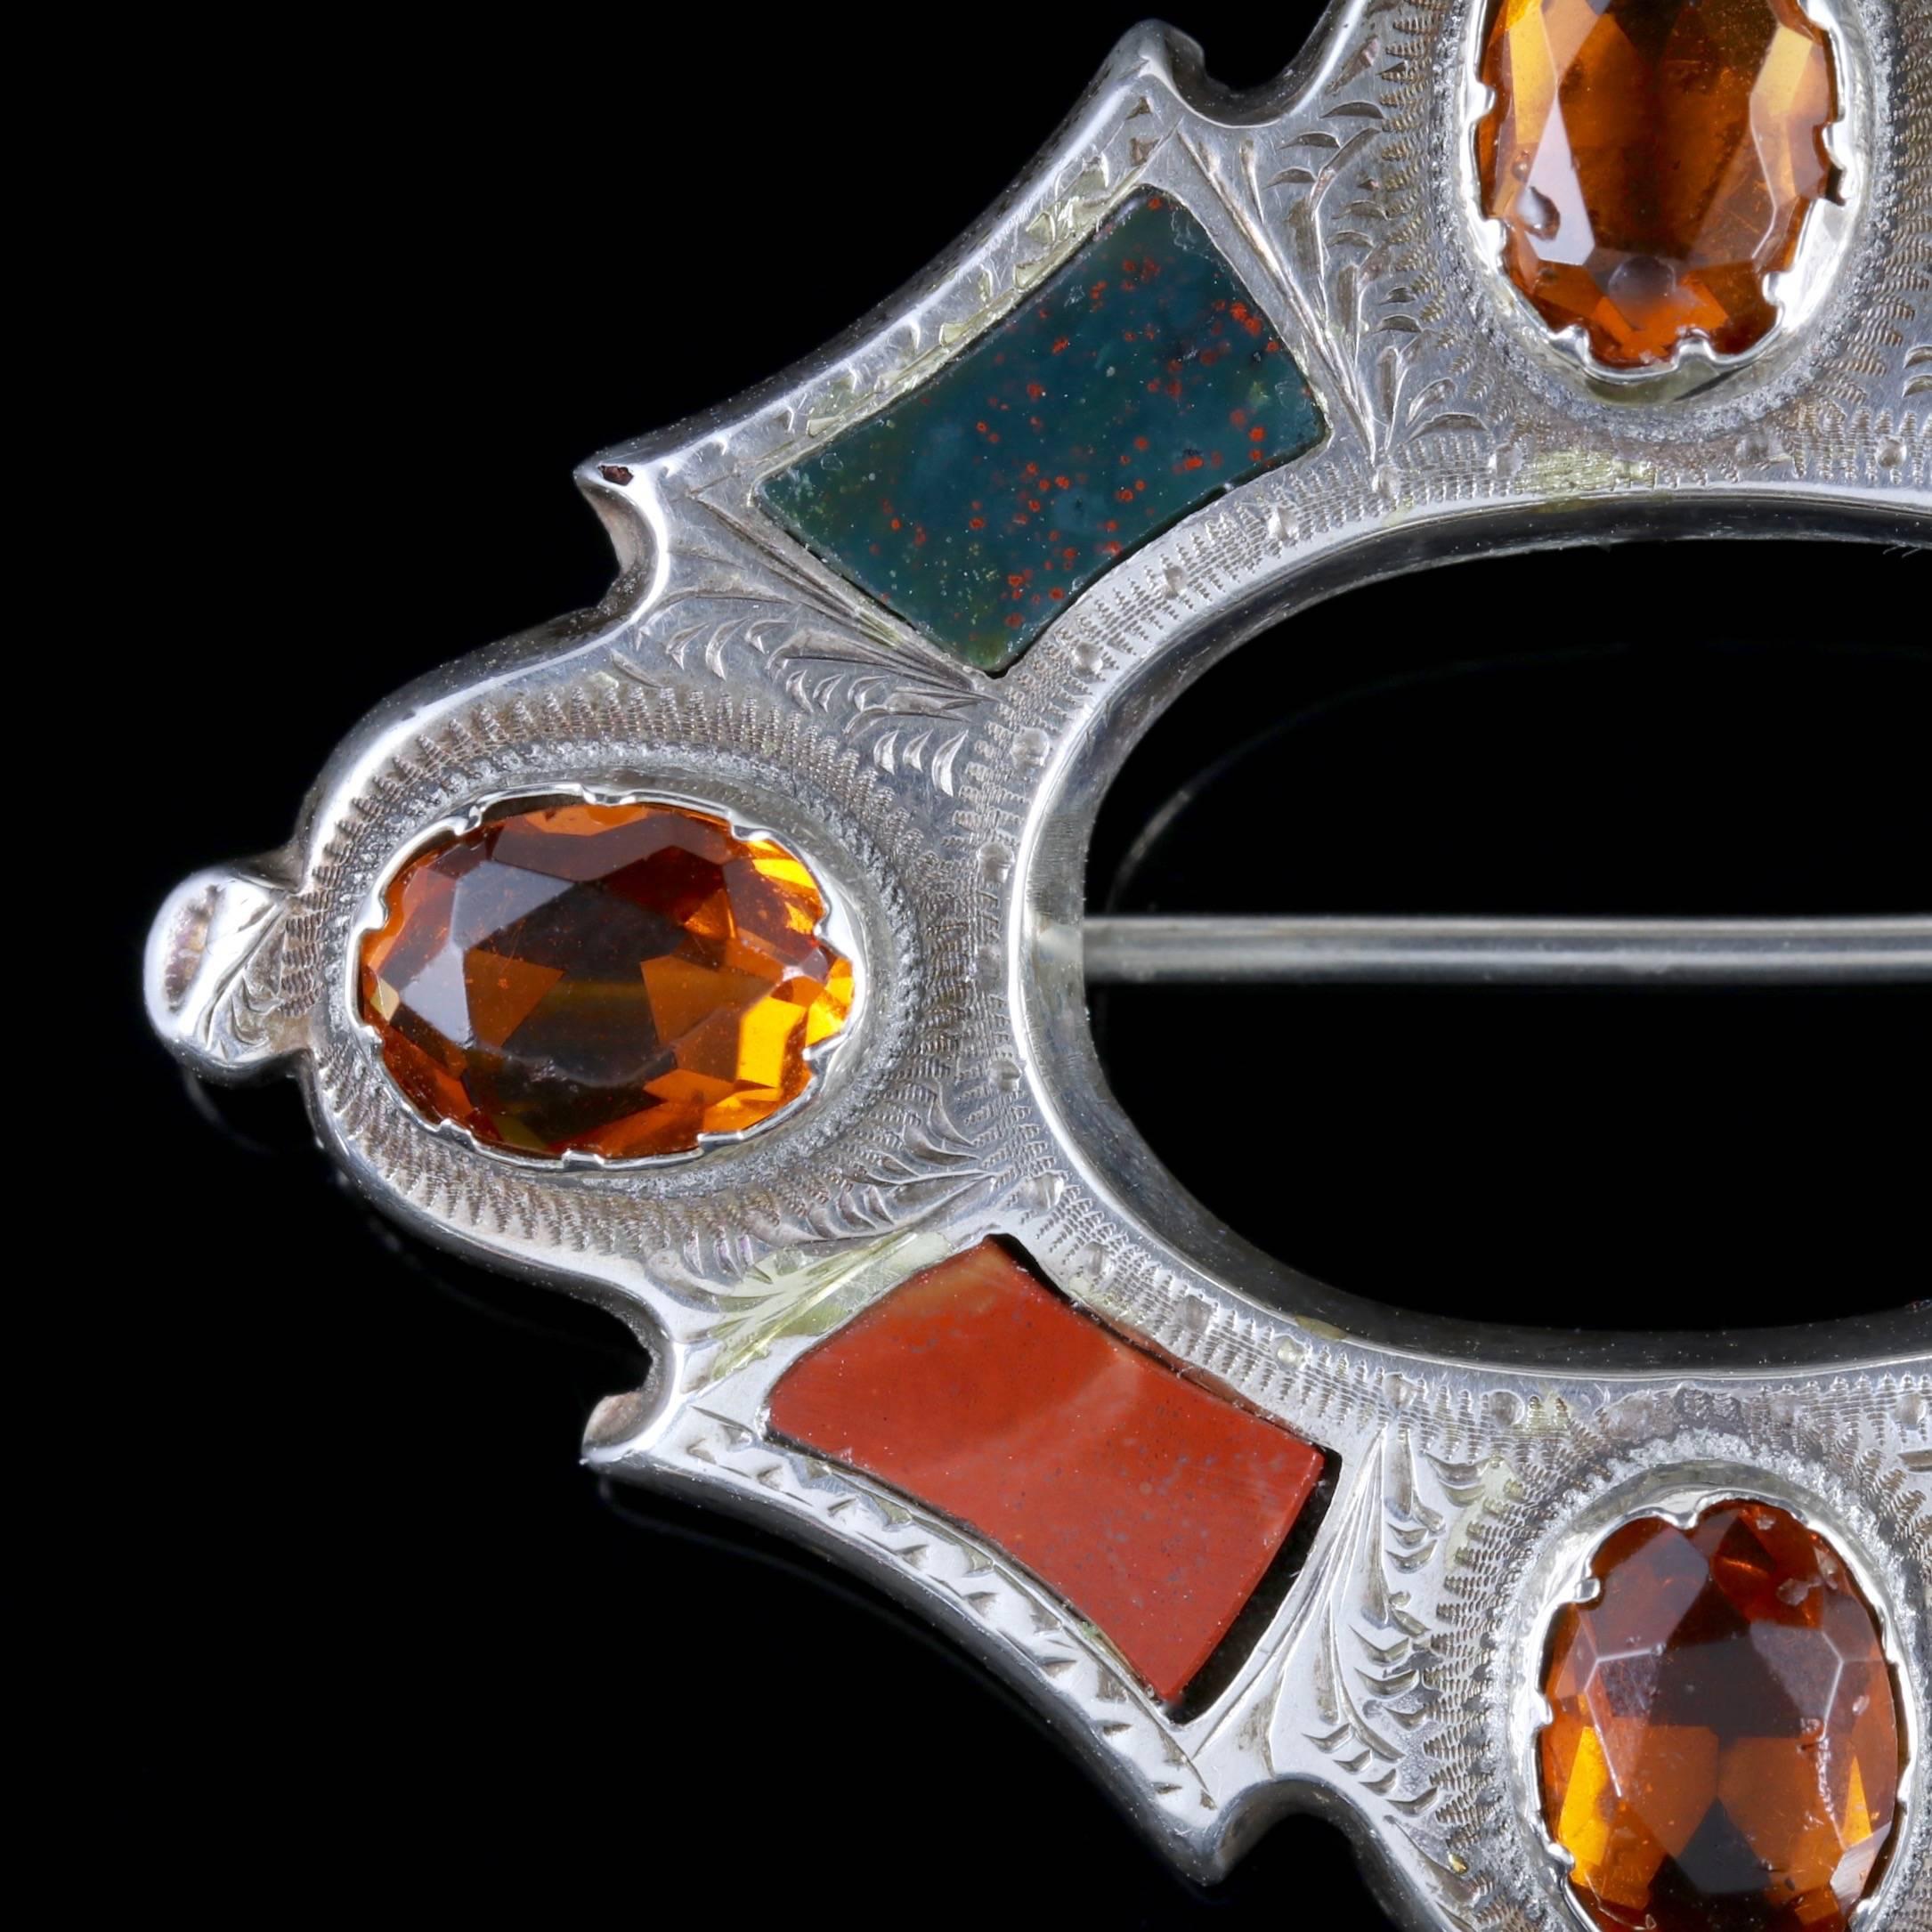 To read more please click continue reading below-

This beautiful antique Victorian Silver Scottish Citrine brooch is Circa 1860.

Scottish jewellery was made popular by Queen Victoria as it became a souvenir of her frequent trips to Scotland and